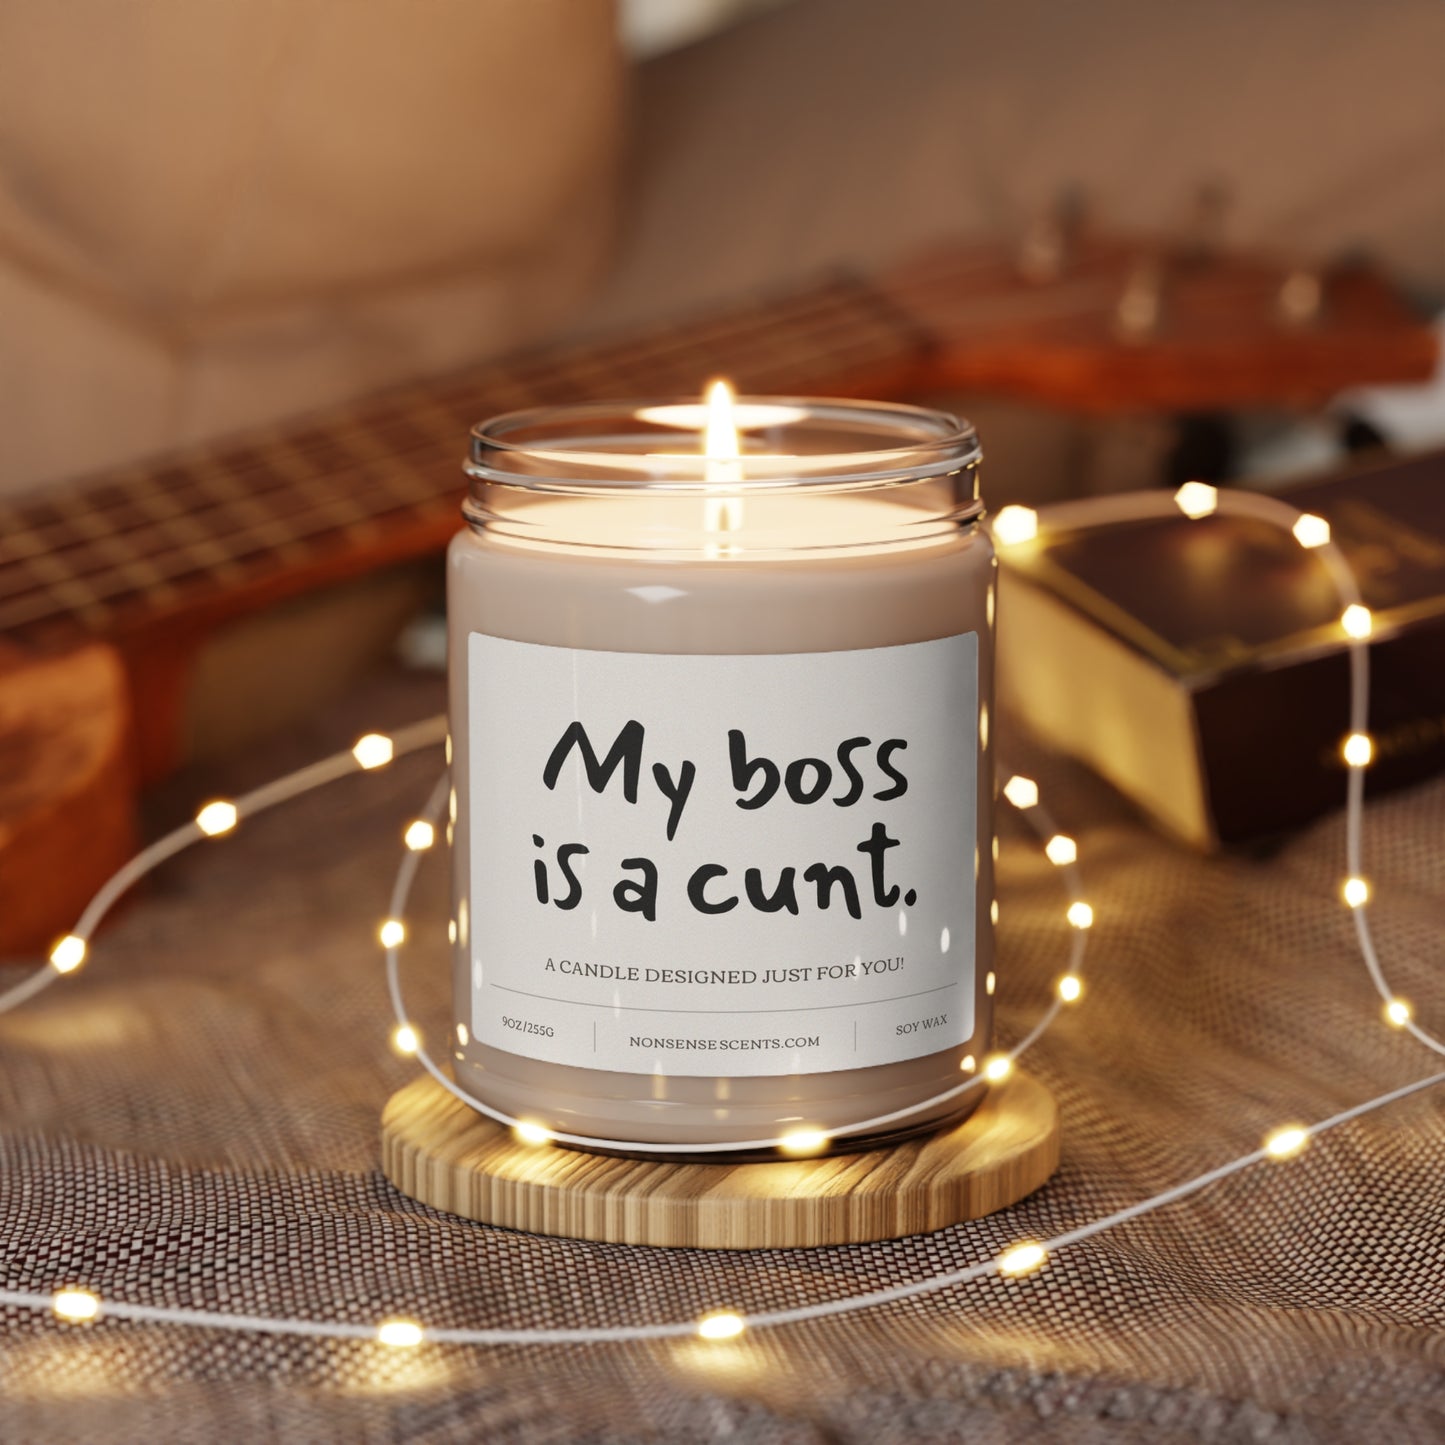 "My Boss Is A Cunt" Scented Candle